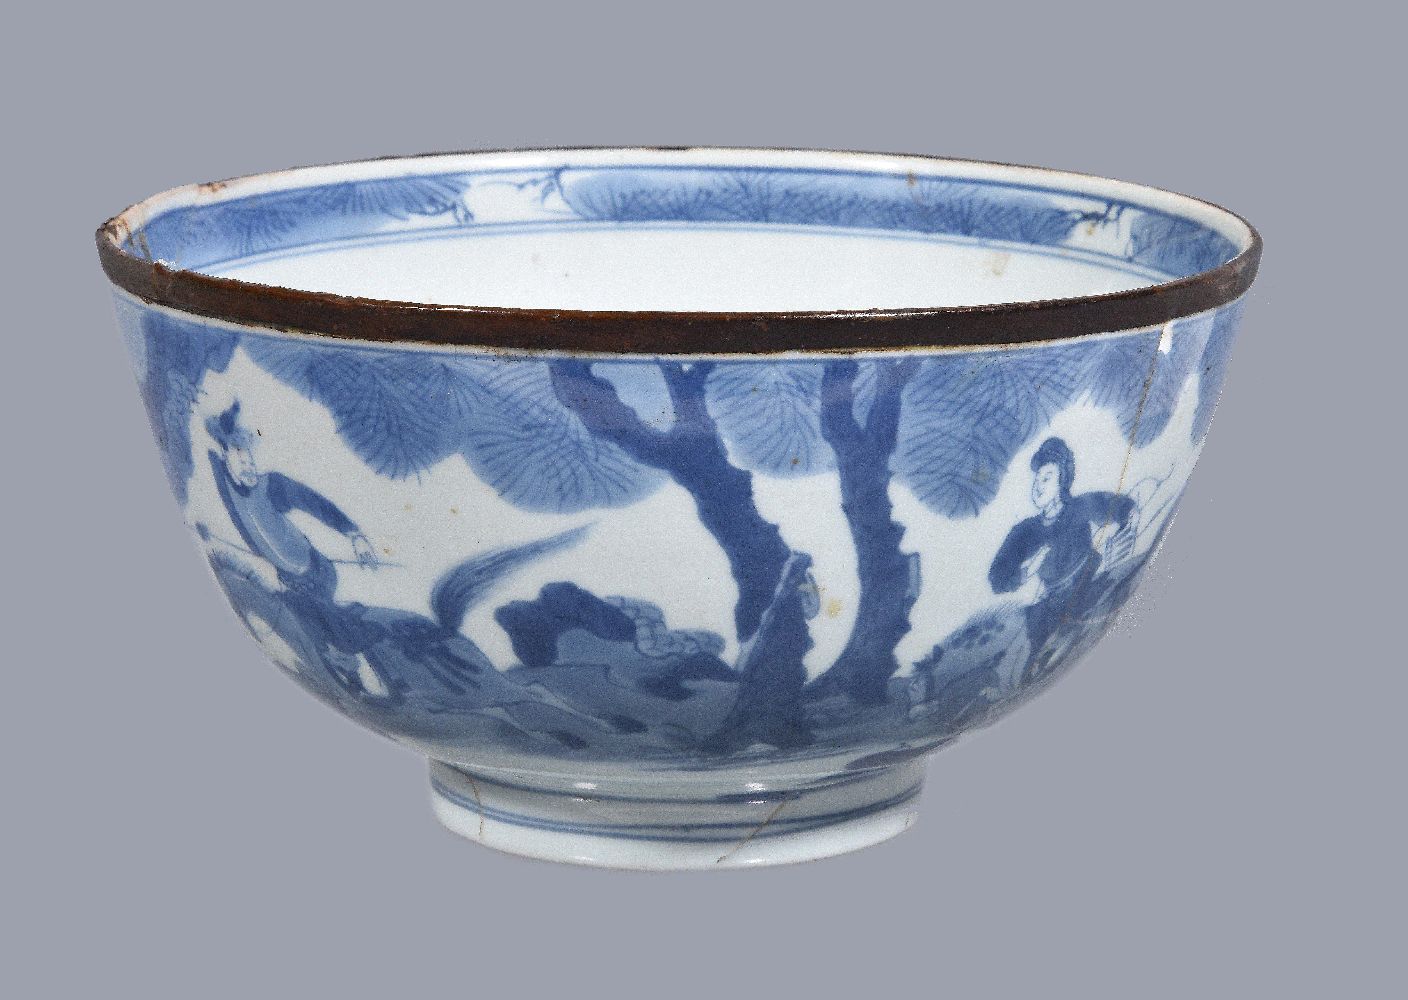 A Chinese blue and white bowl, circa 1650, decorated in cobalt blue with a hunting scene depicting